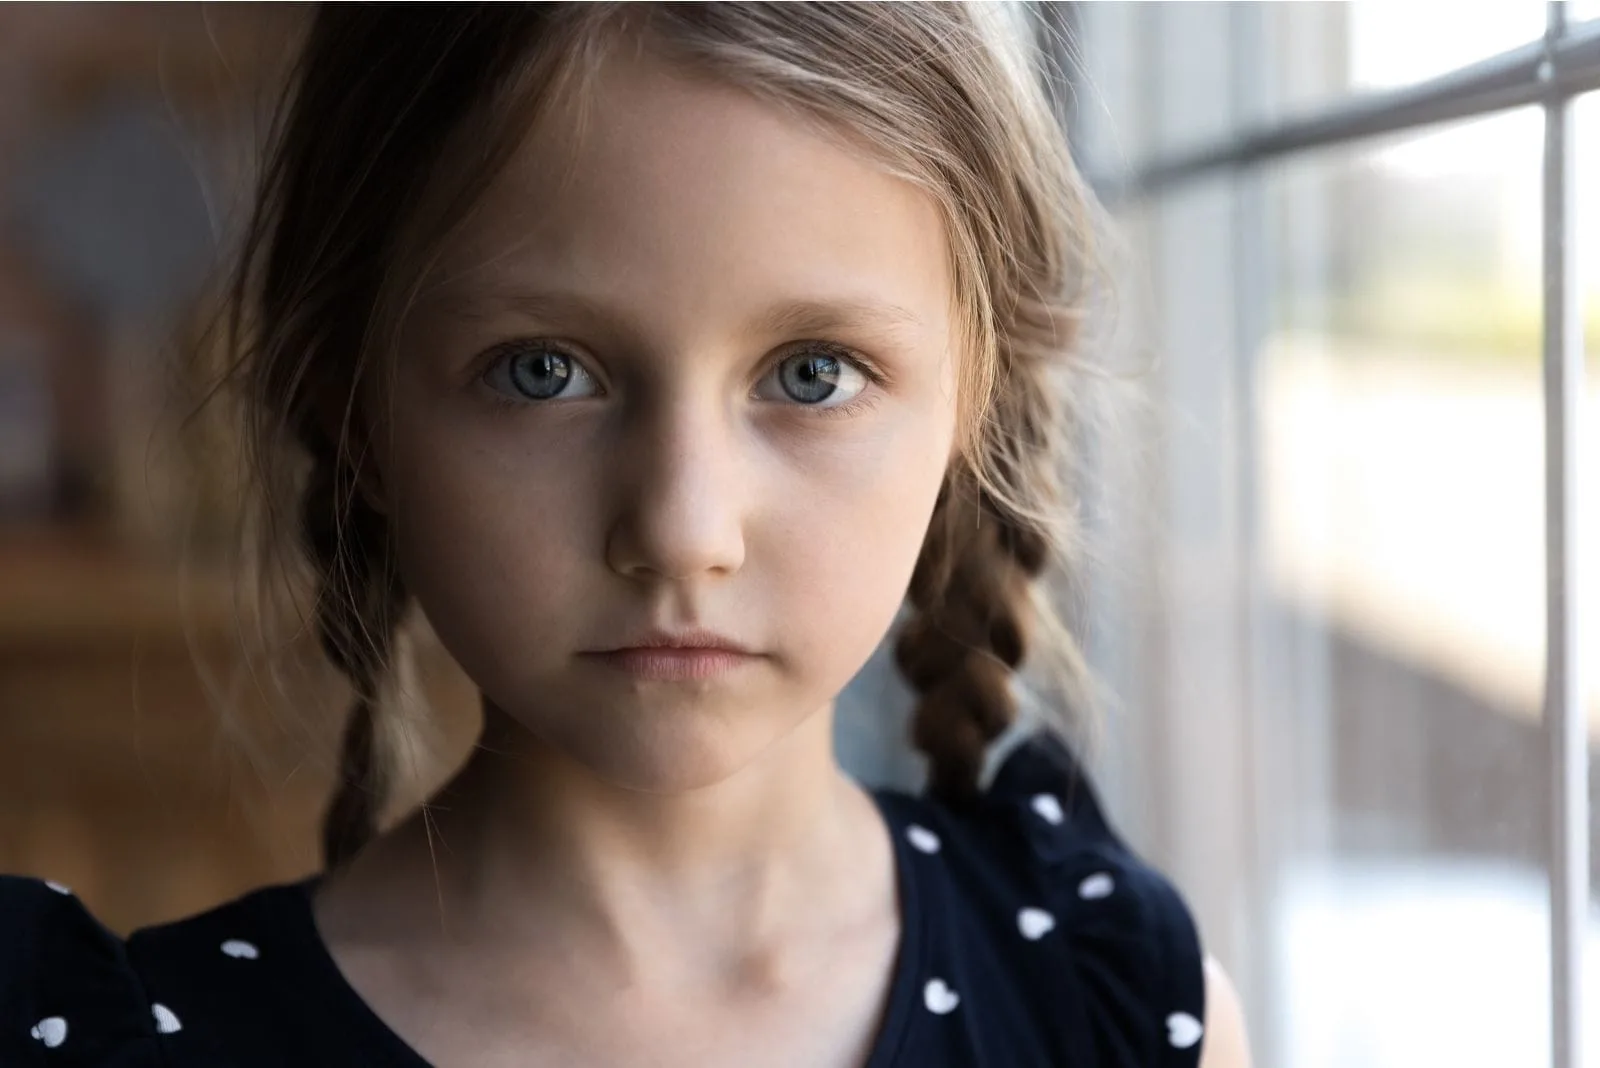 cropped image of a sad child looking at the camera standing beside the windows